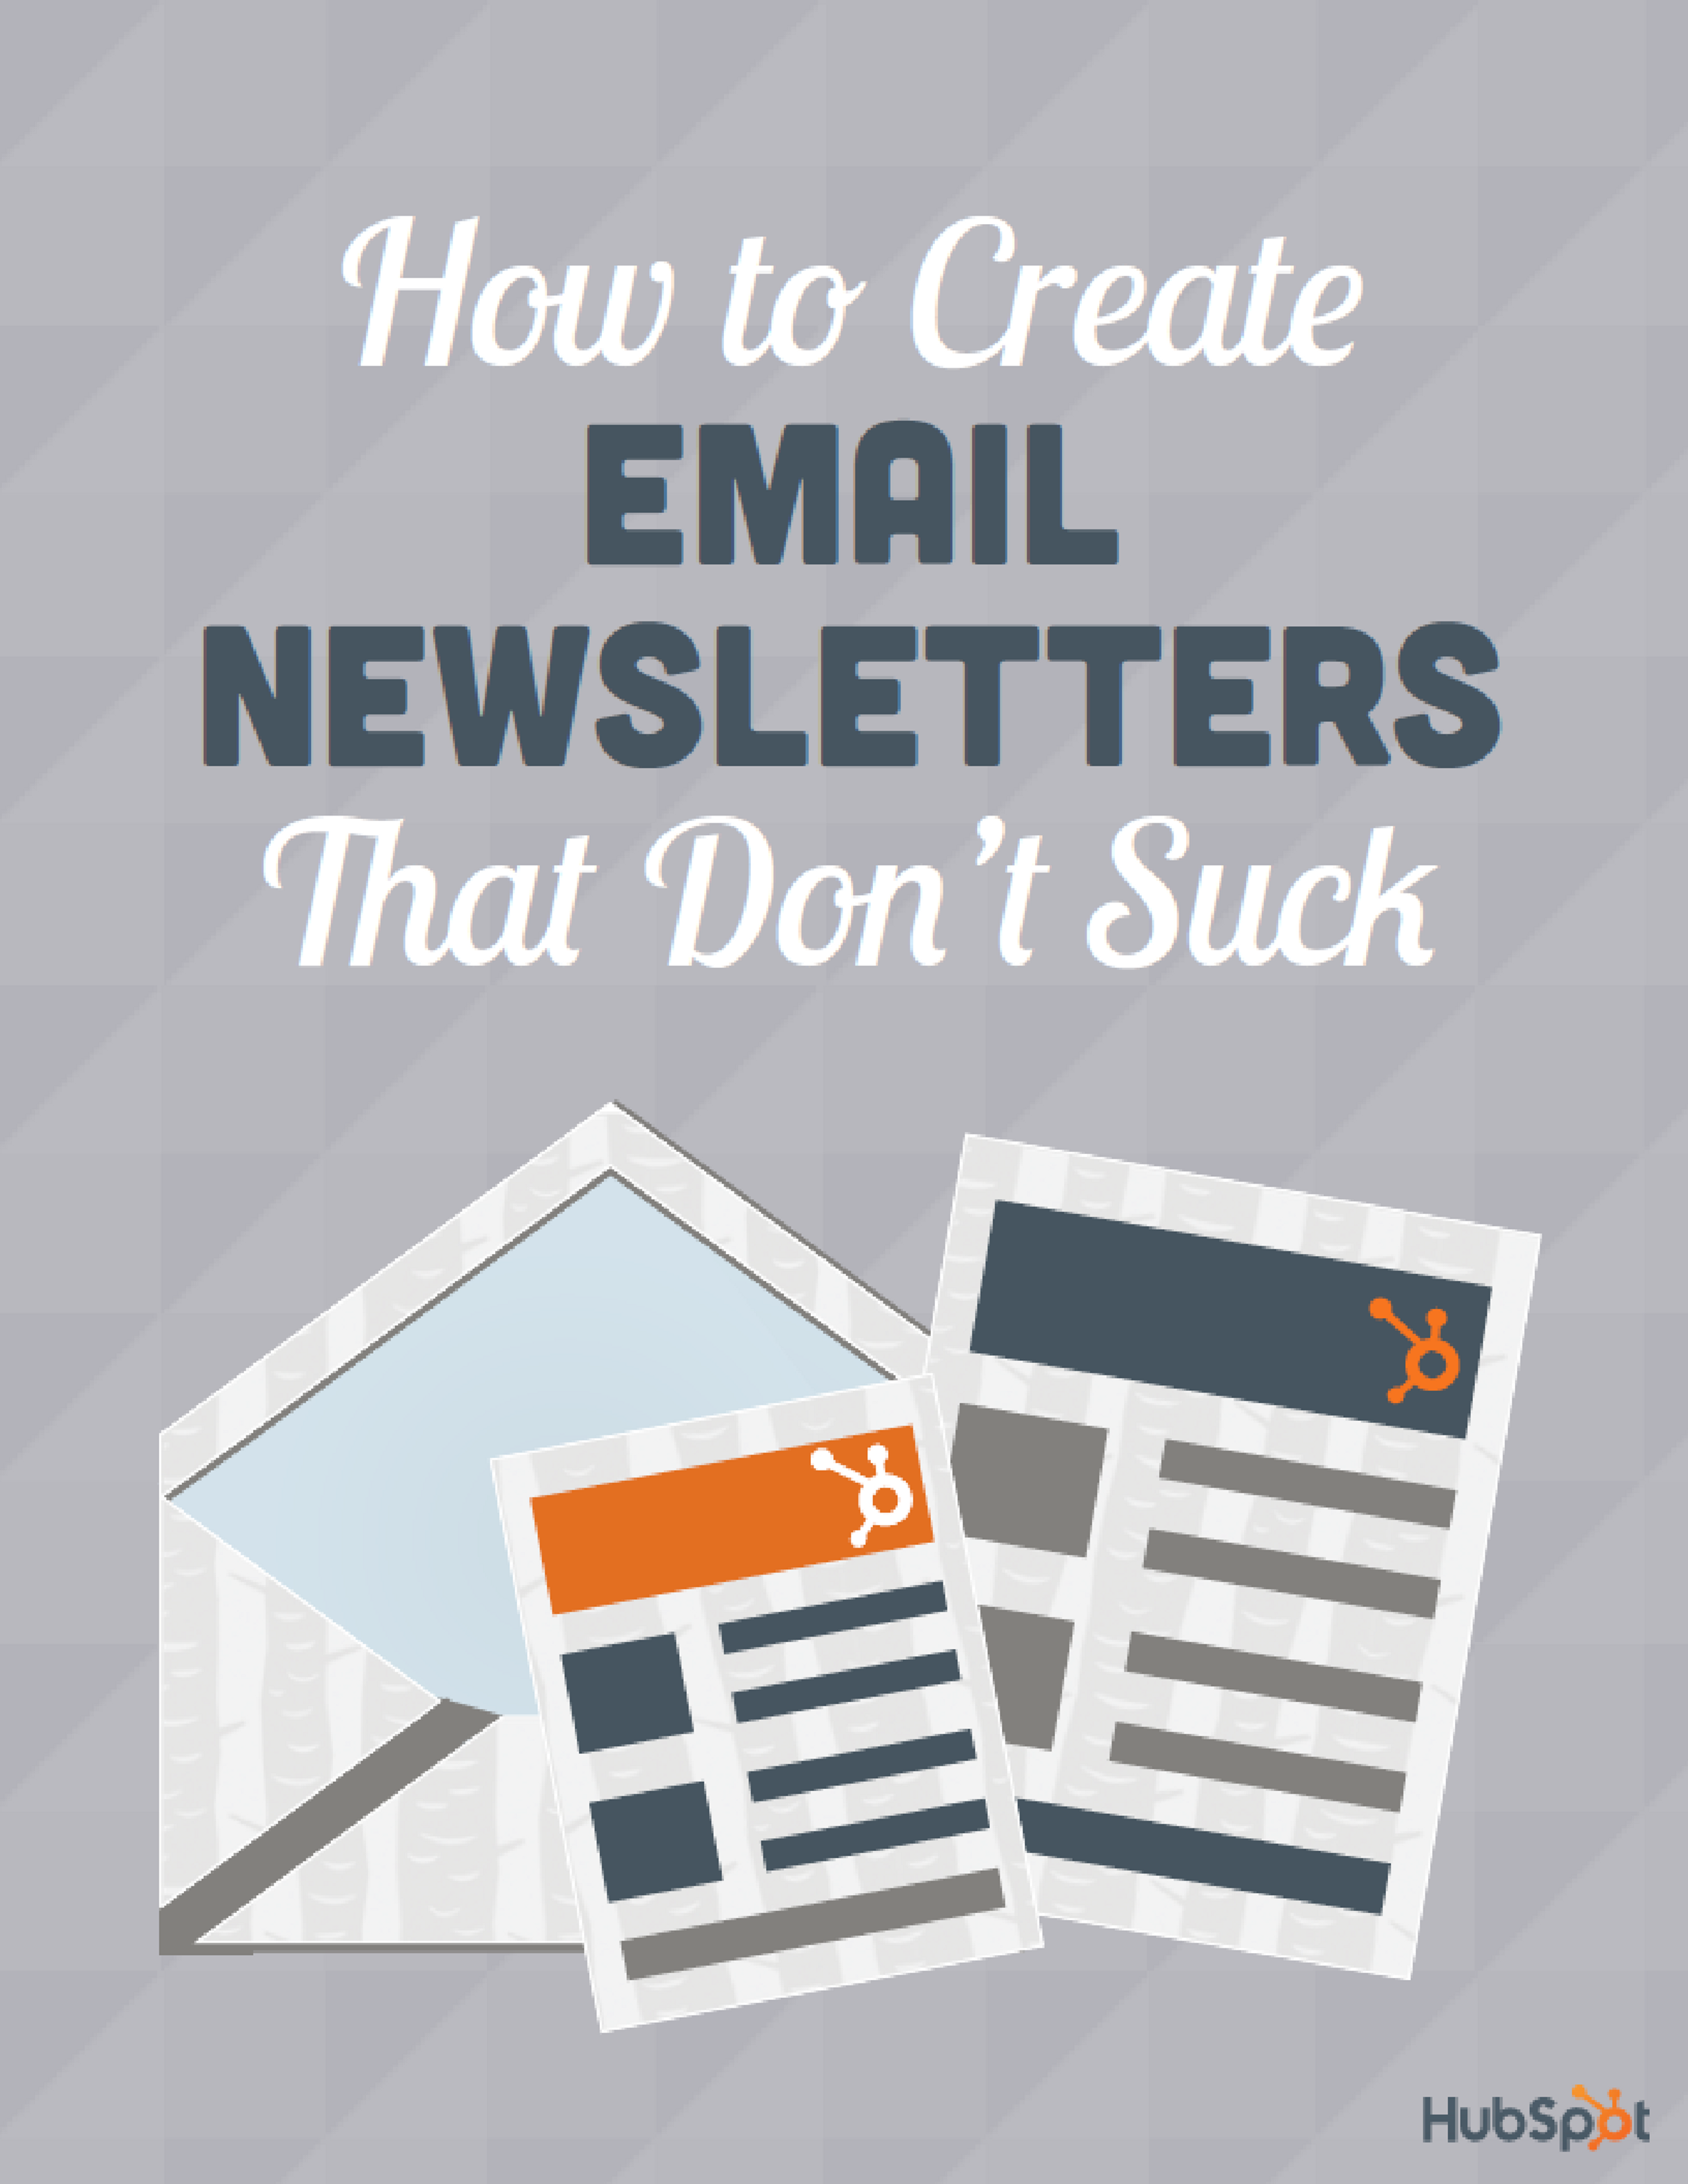 How to Write Newsletters for Startups and Entrepreneurs